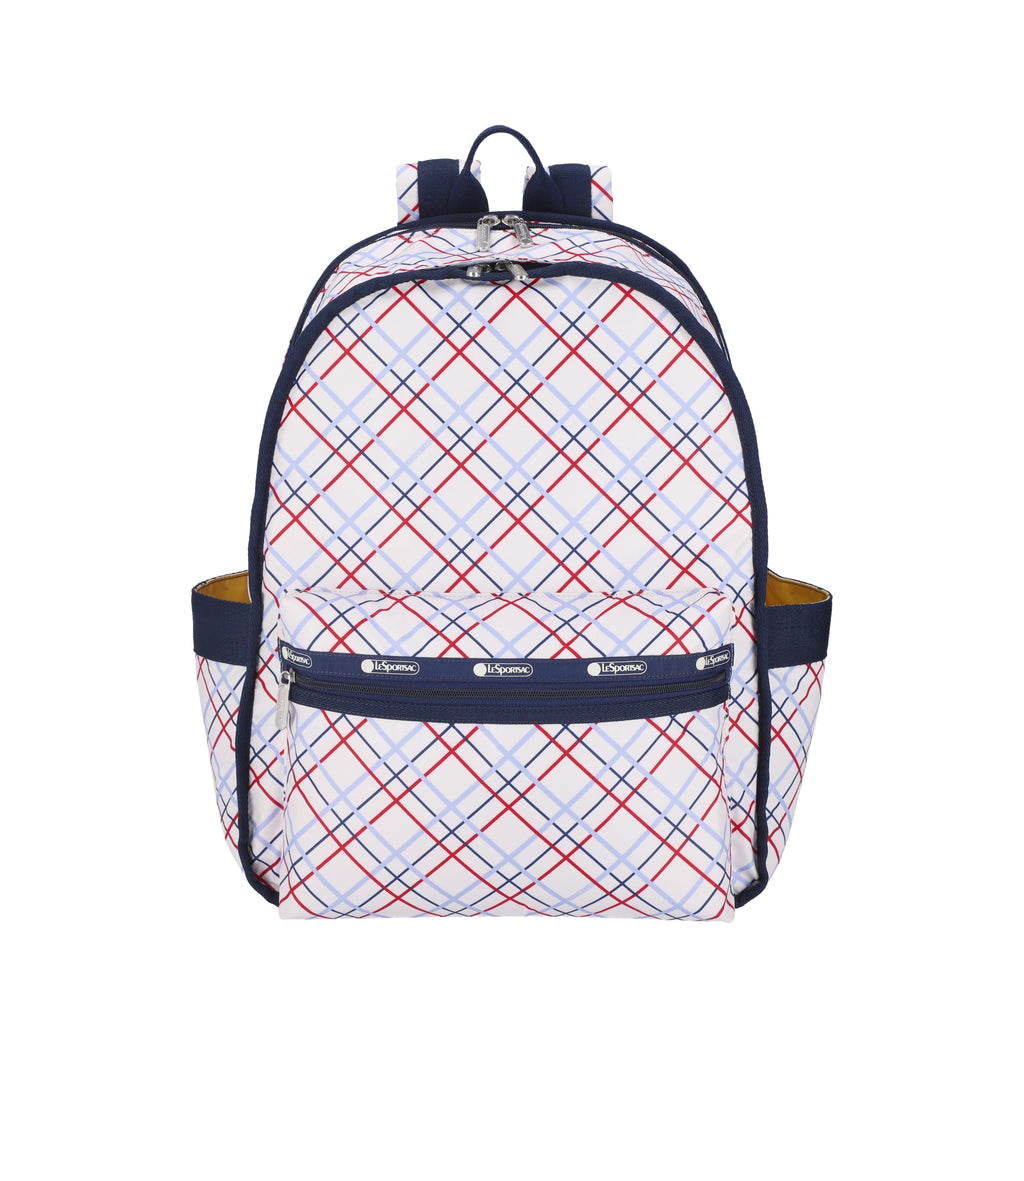 Route Backpack - 23969002913840